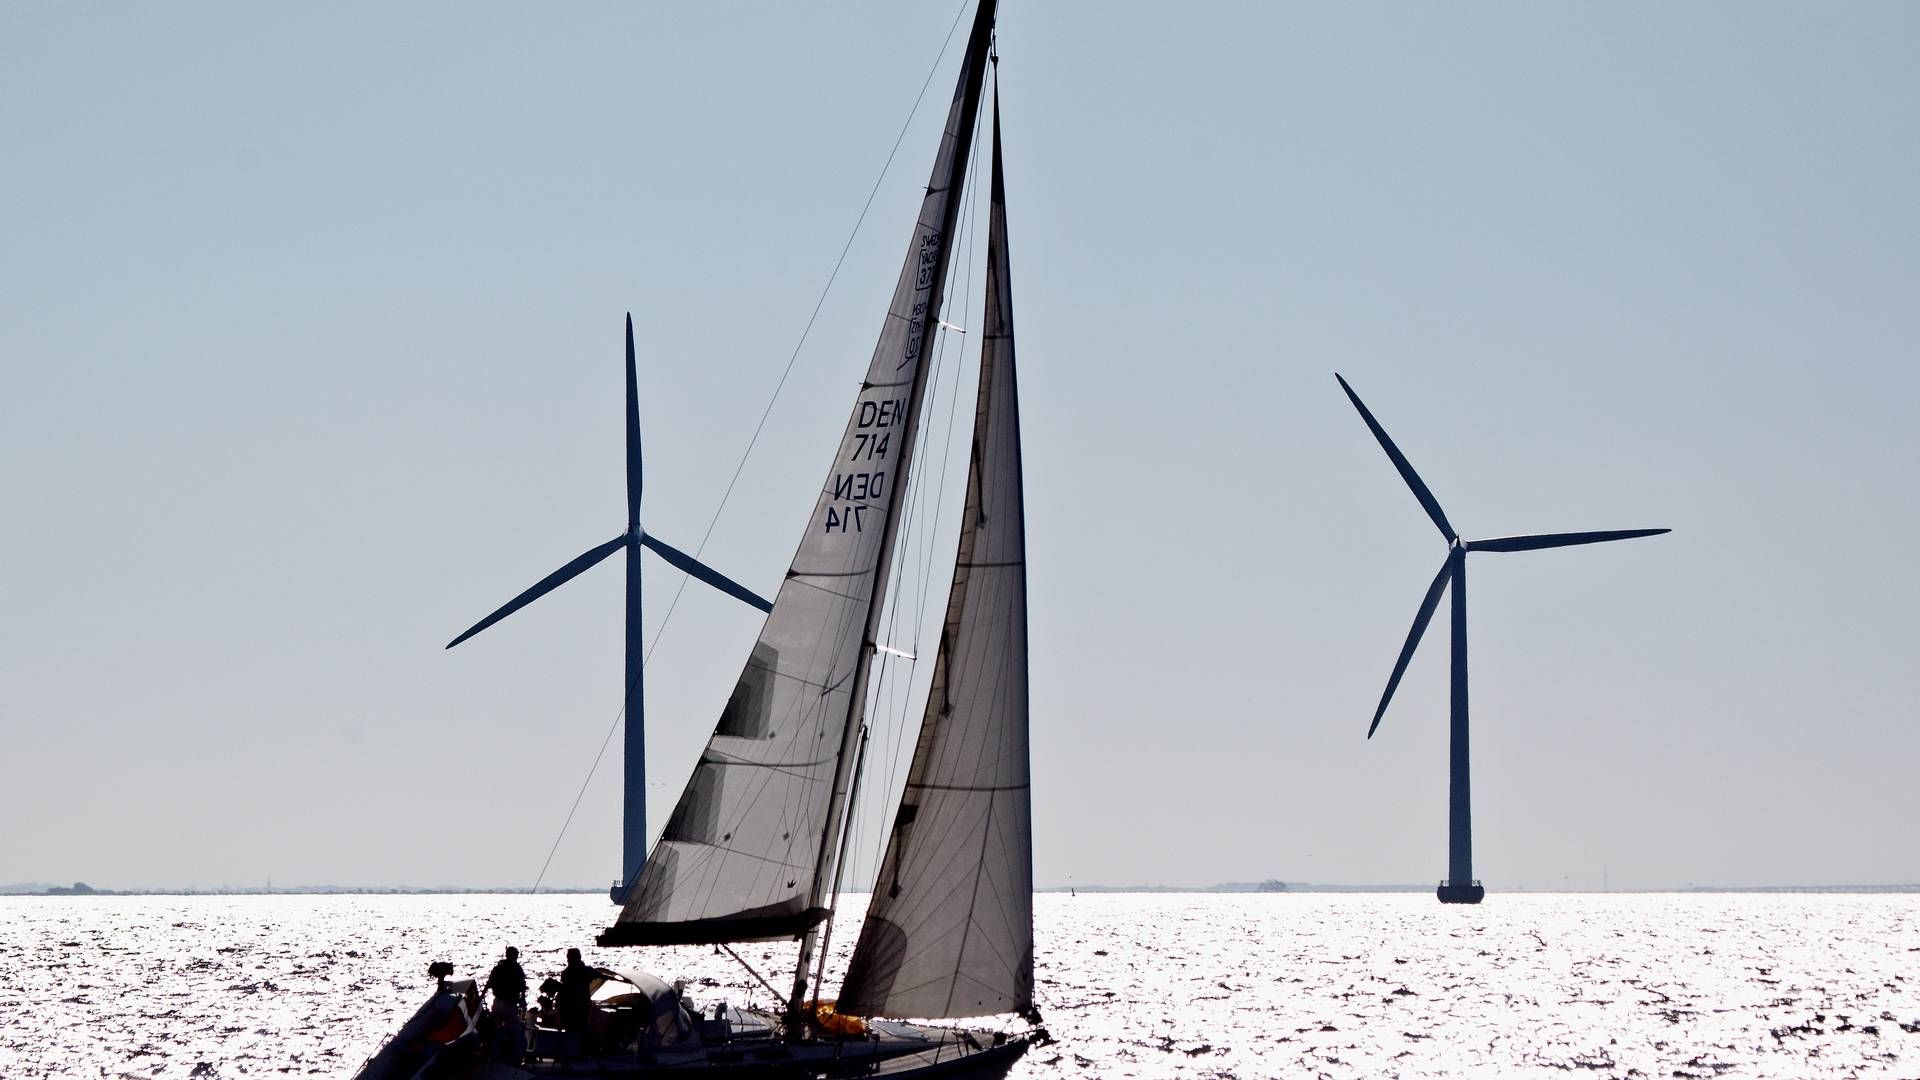 Danish Chamber of Commerce remains critical of the price on government’s offshore wind plans. And who will be stuck with the bill of the potential co-ownership | Photo: Jens Dresling